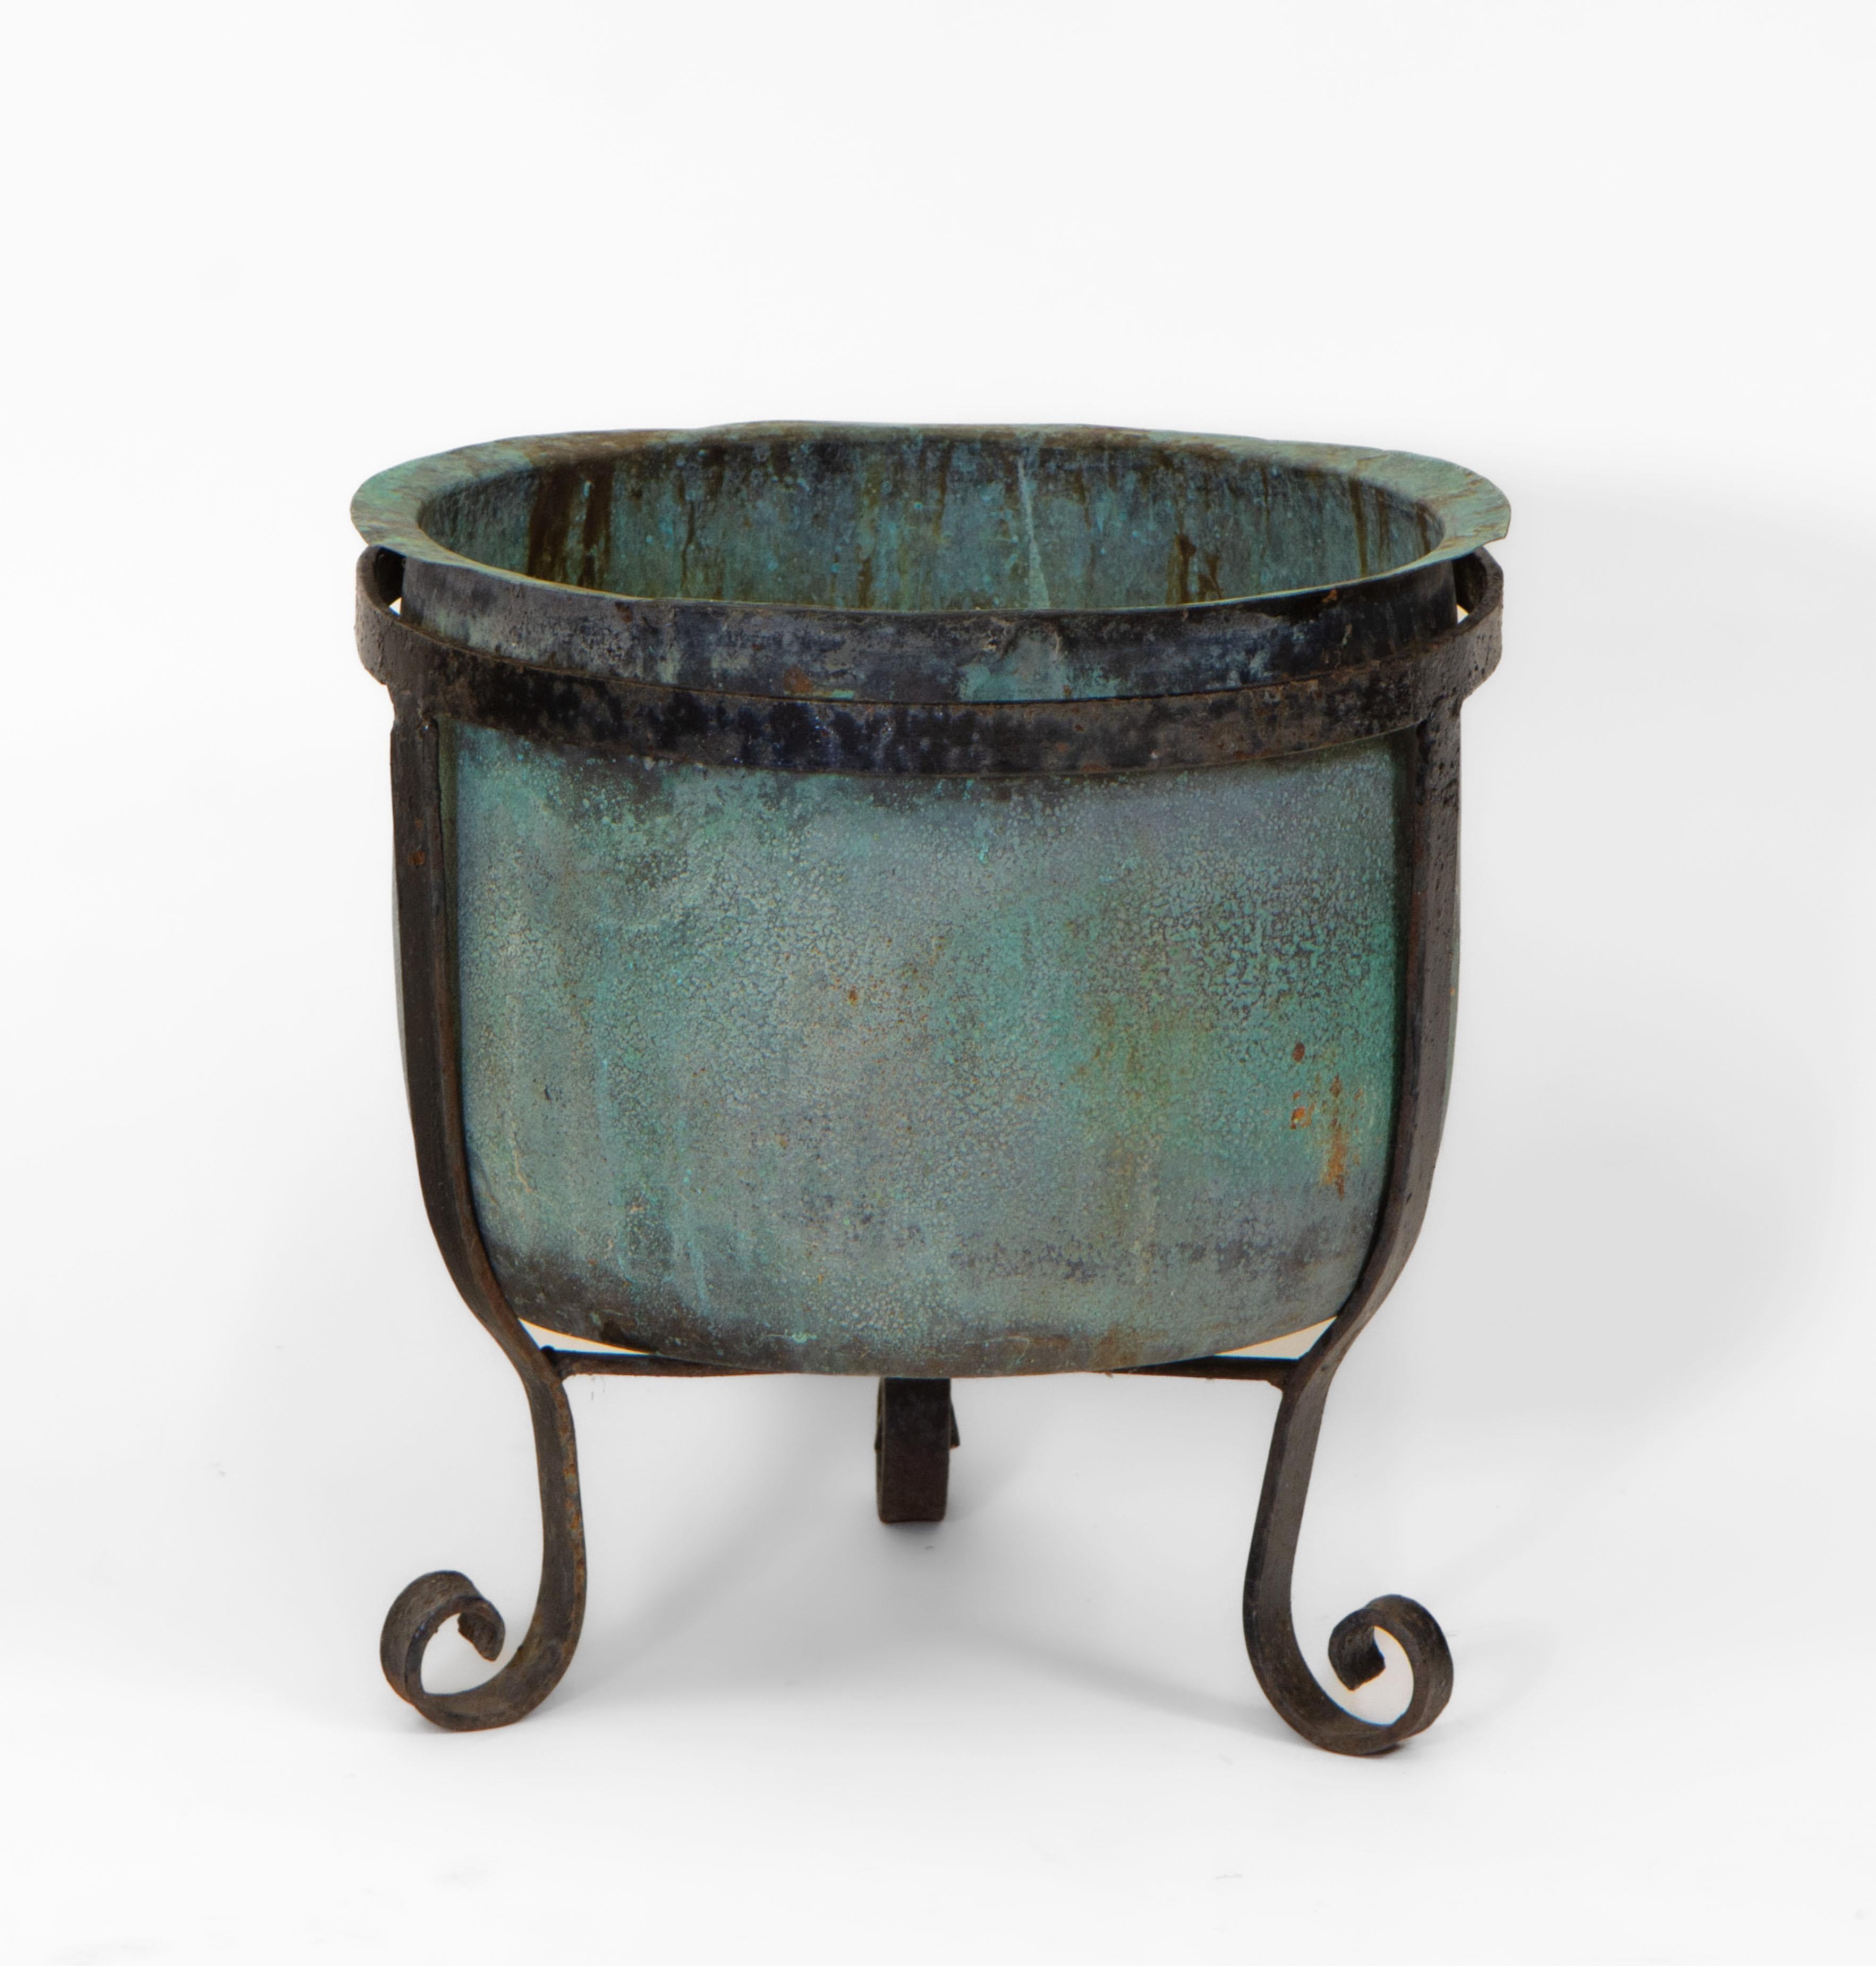 A wonderful English 19th century copper verdigris planter on wrought iron stand with scrolled feet.

UK delivery included.

The pot showing lovely natural verdigris patina, weathered, slightly misshapen. Structural very sound it has no drainage